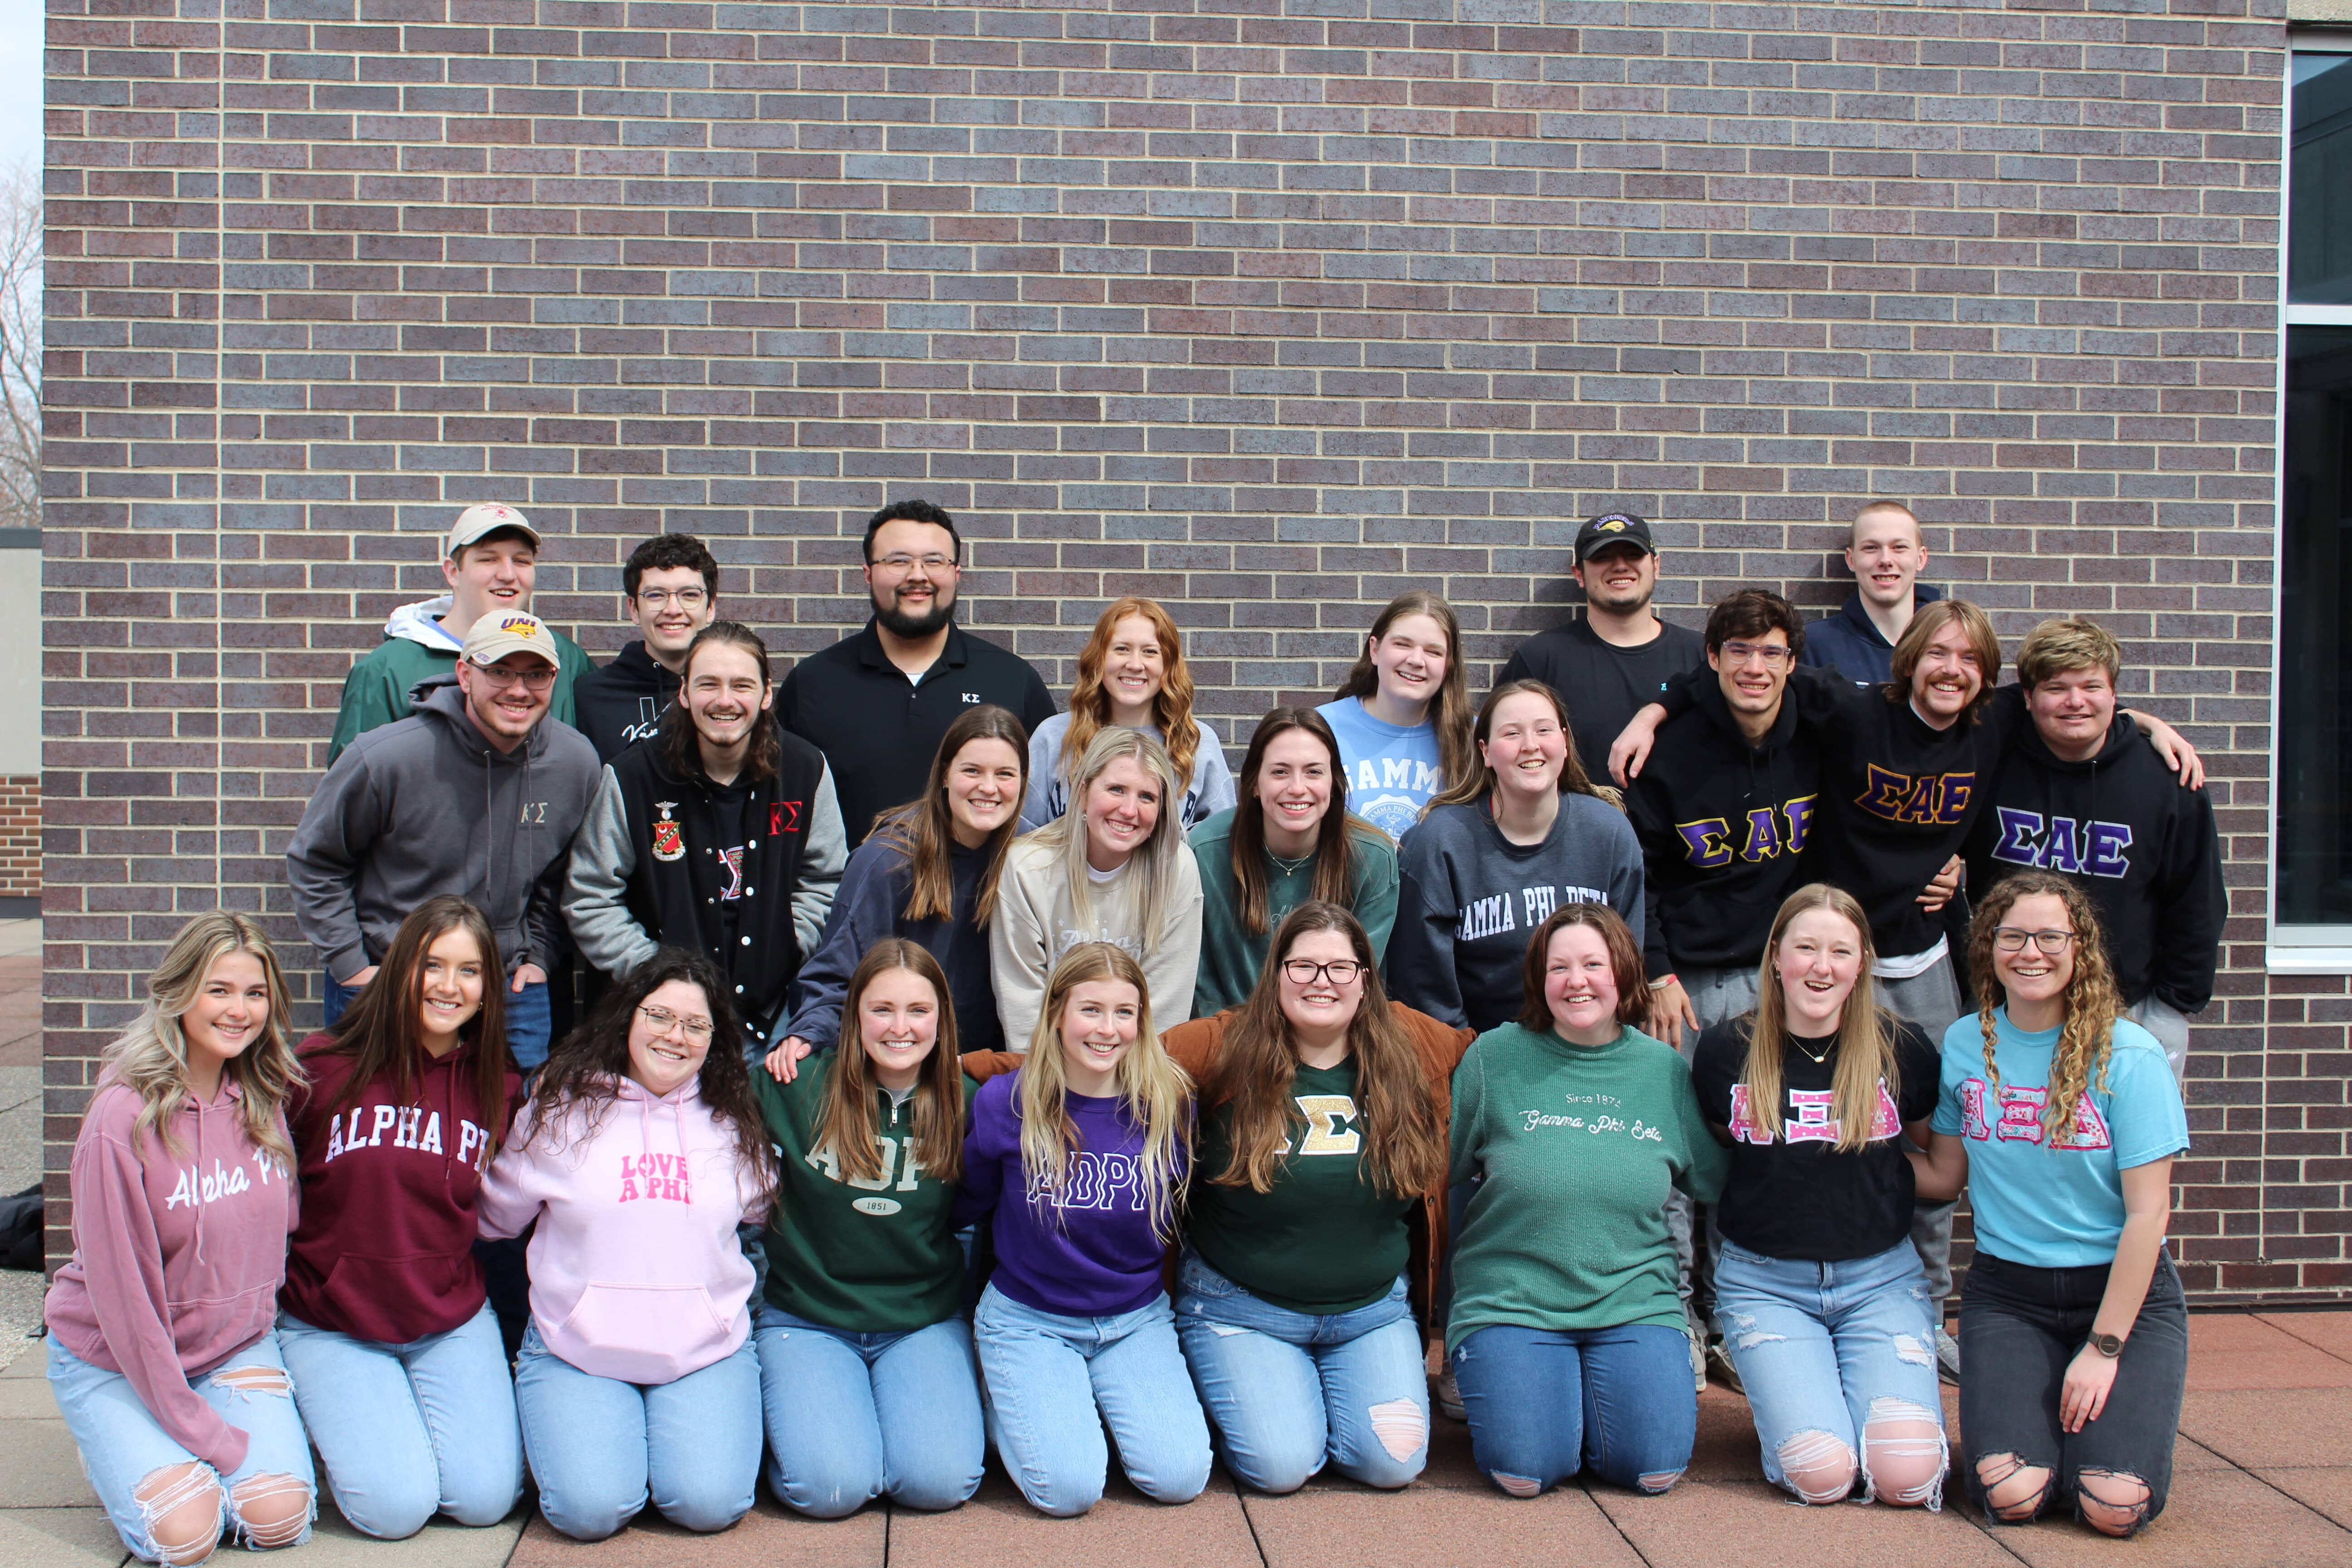 Group photo of fraternity and sorority members